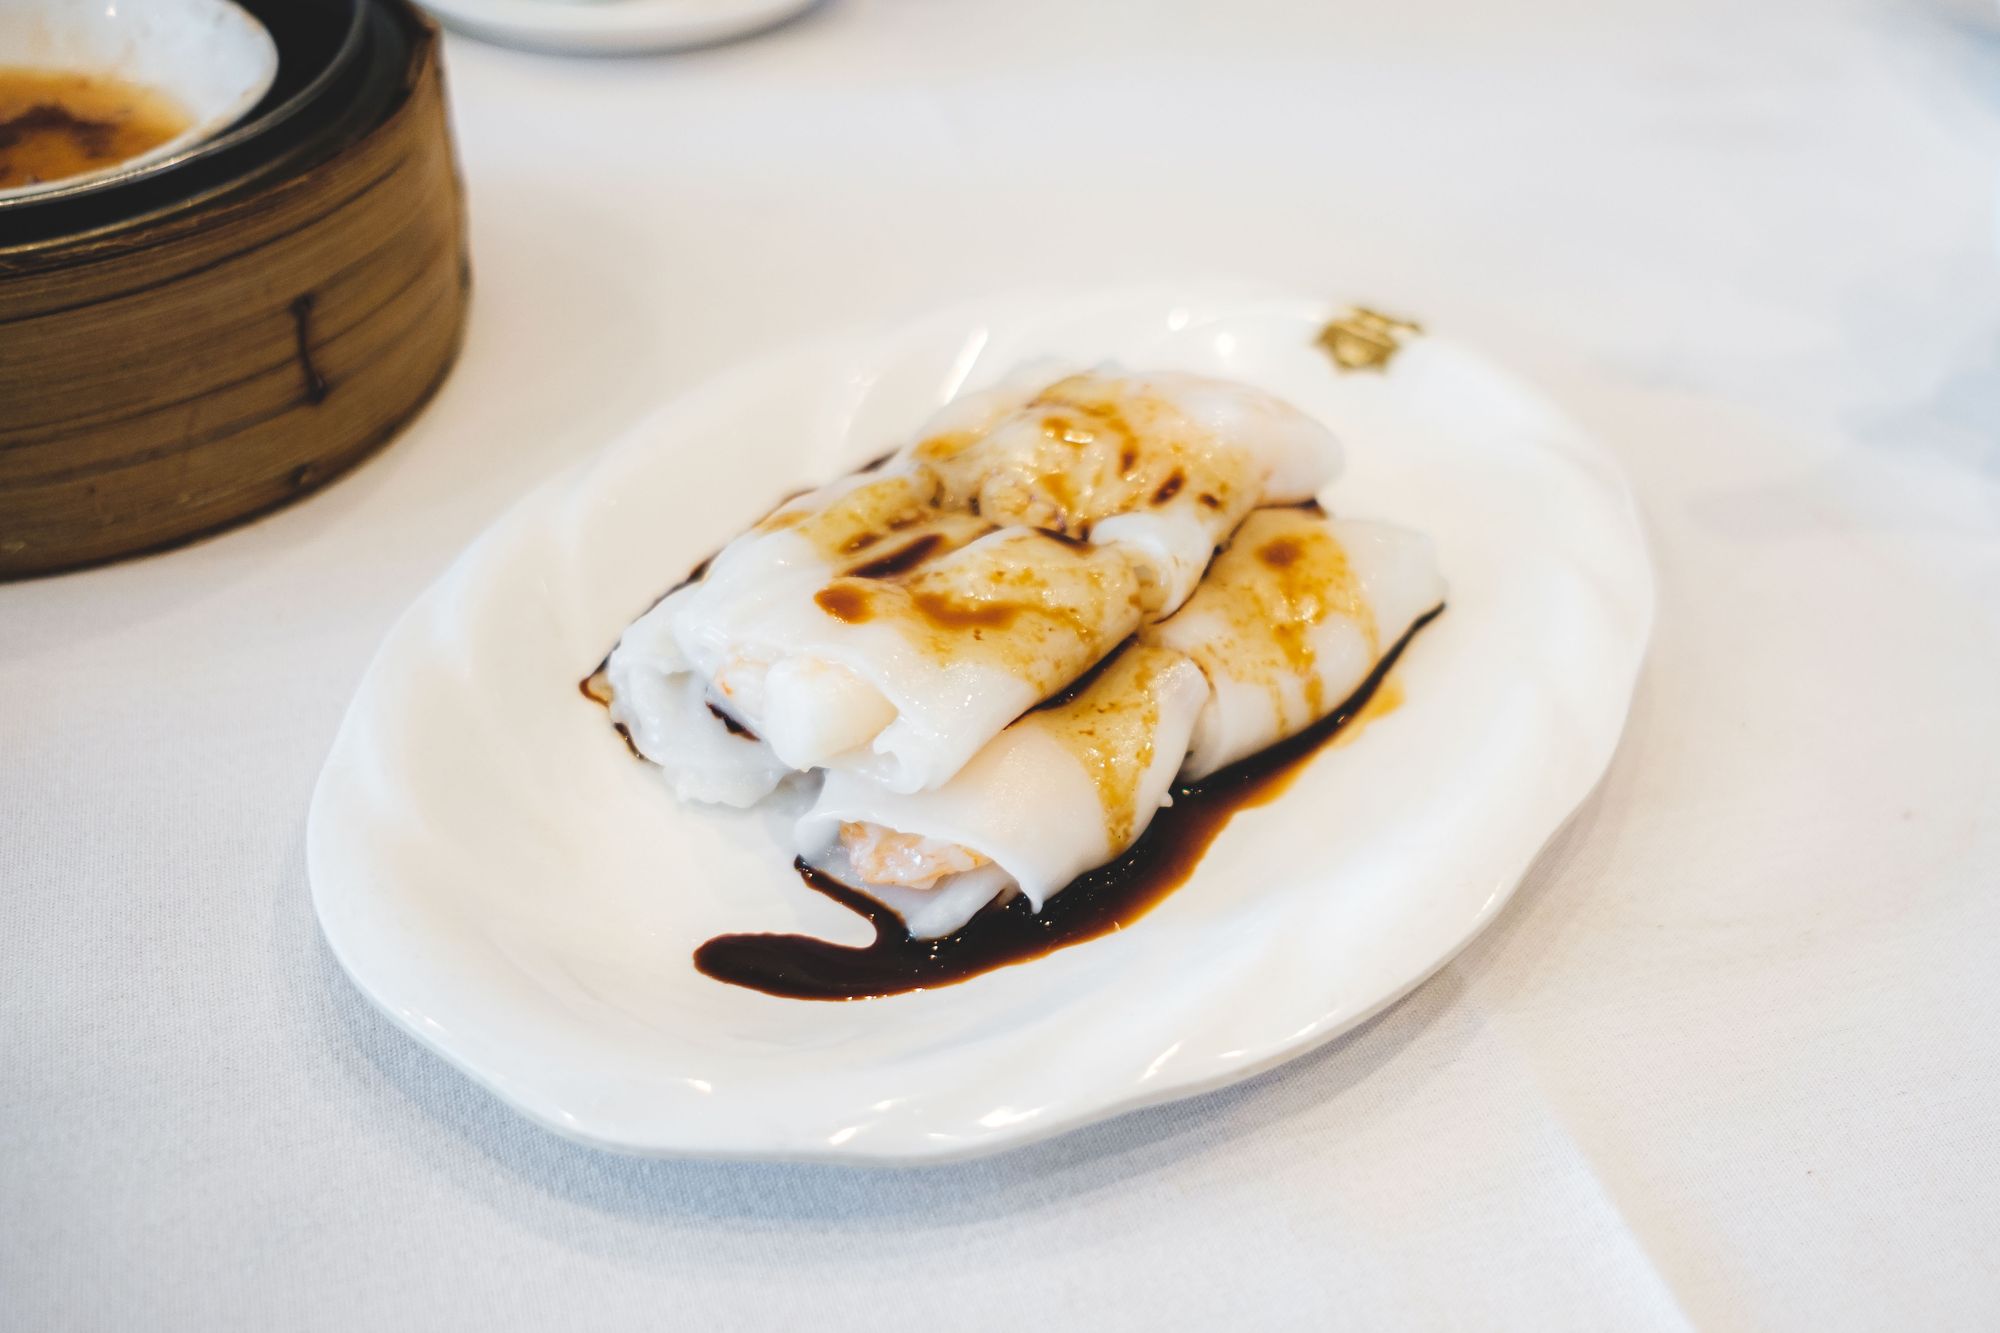 Sun Sui Wah – Steamed Rice Rolls with Prawns